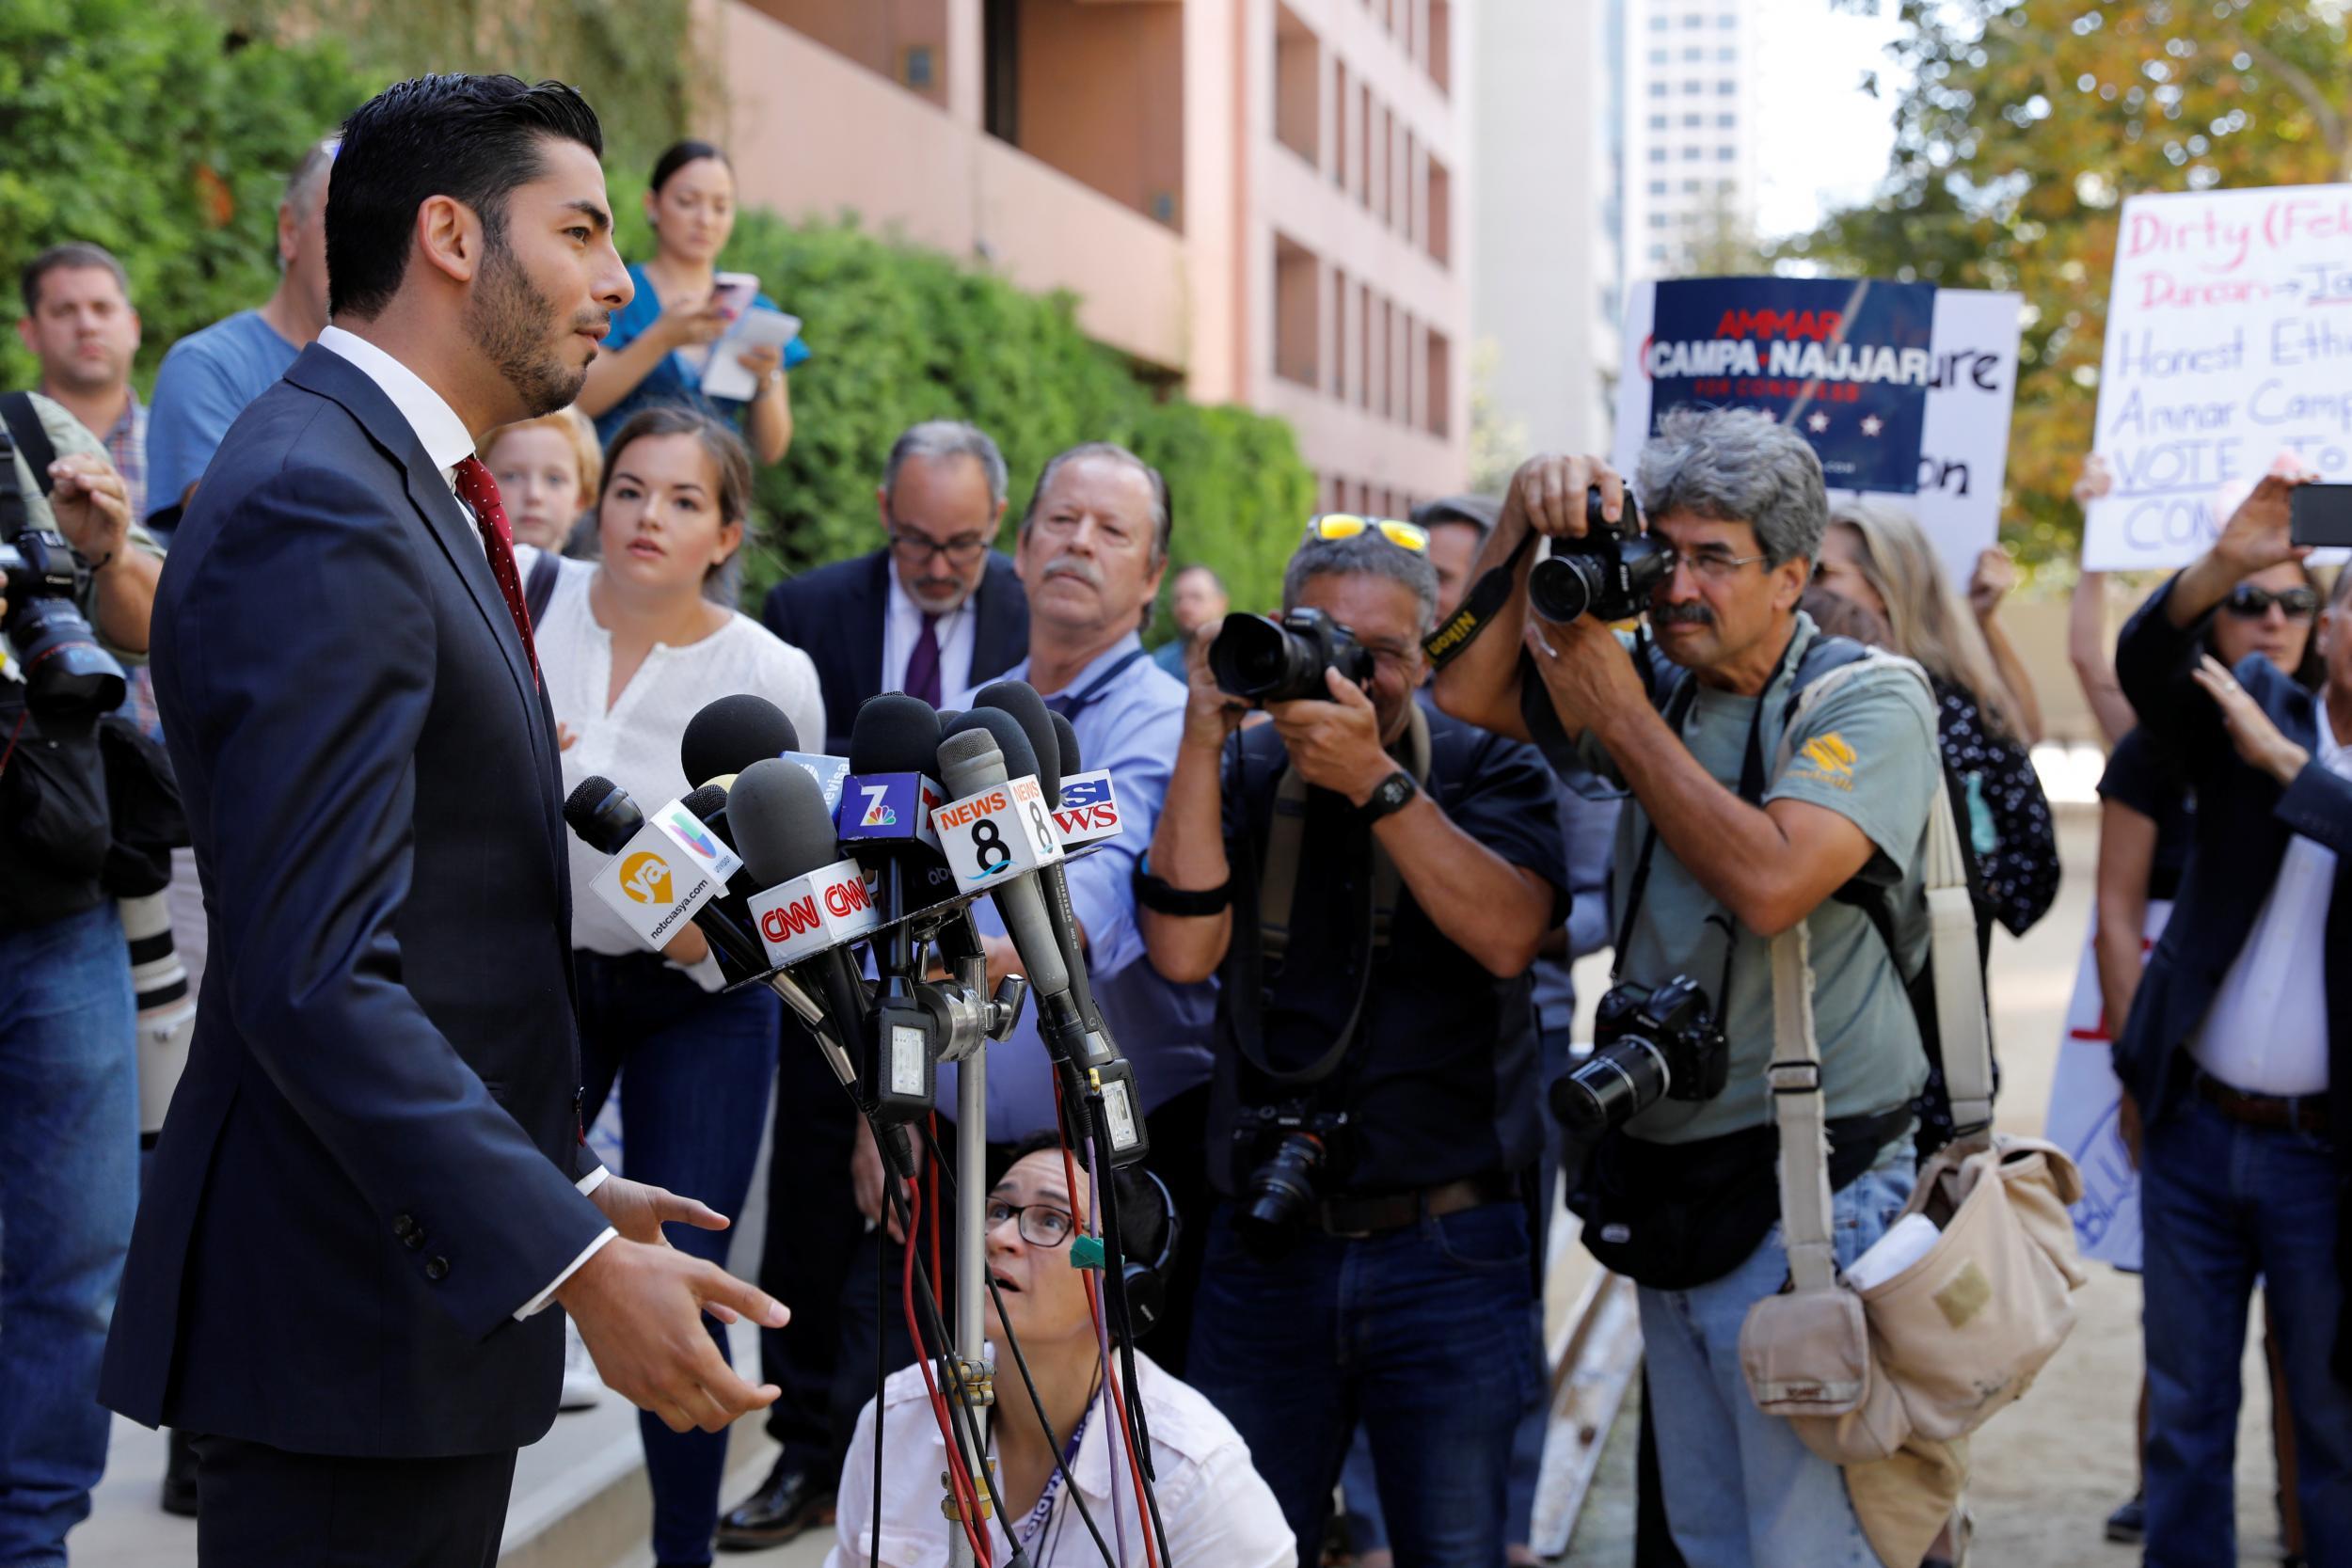 Democratic candidate for the 50th congressional district Ammar Campa Najjar makes an appearance outside federal court where incumbent Duncan Hunter (R-CA) and his wife were being arraigned in San Diego, California, 23 August 2018.